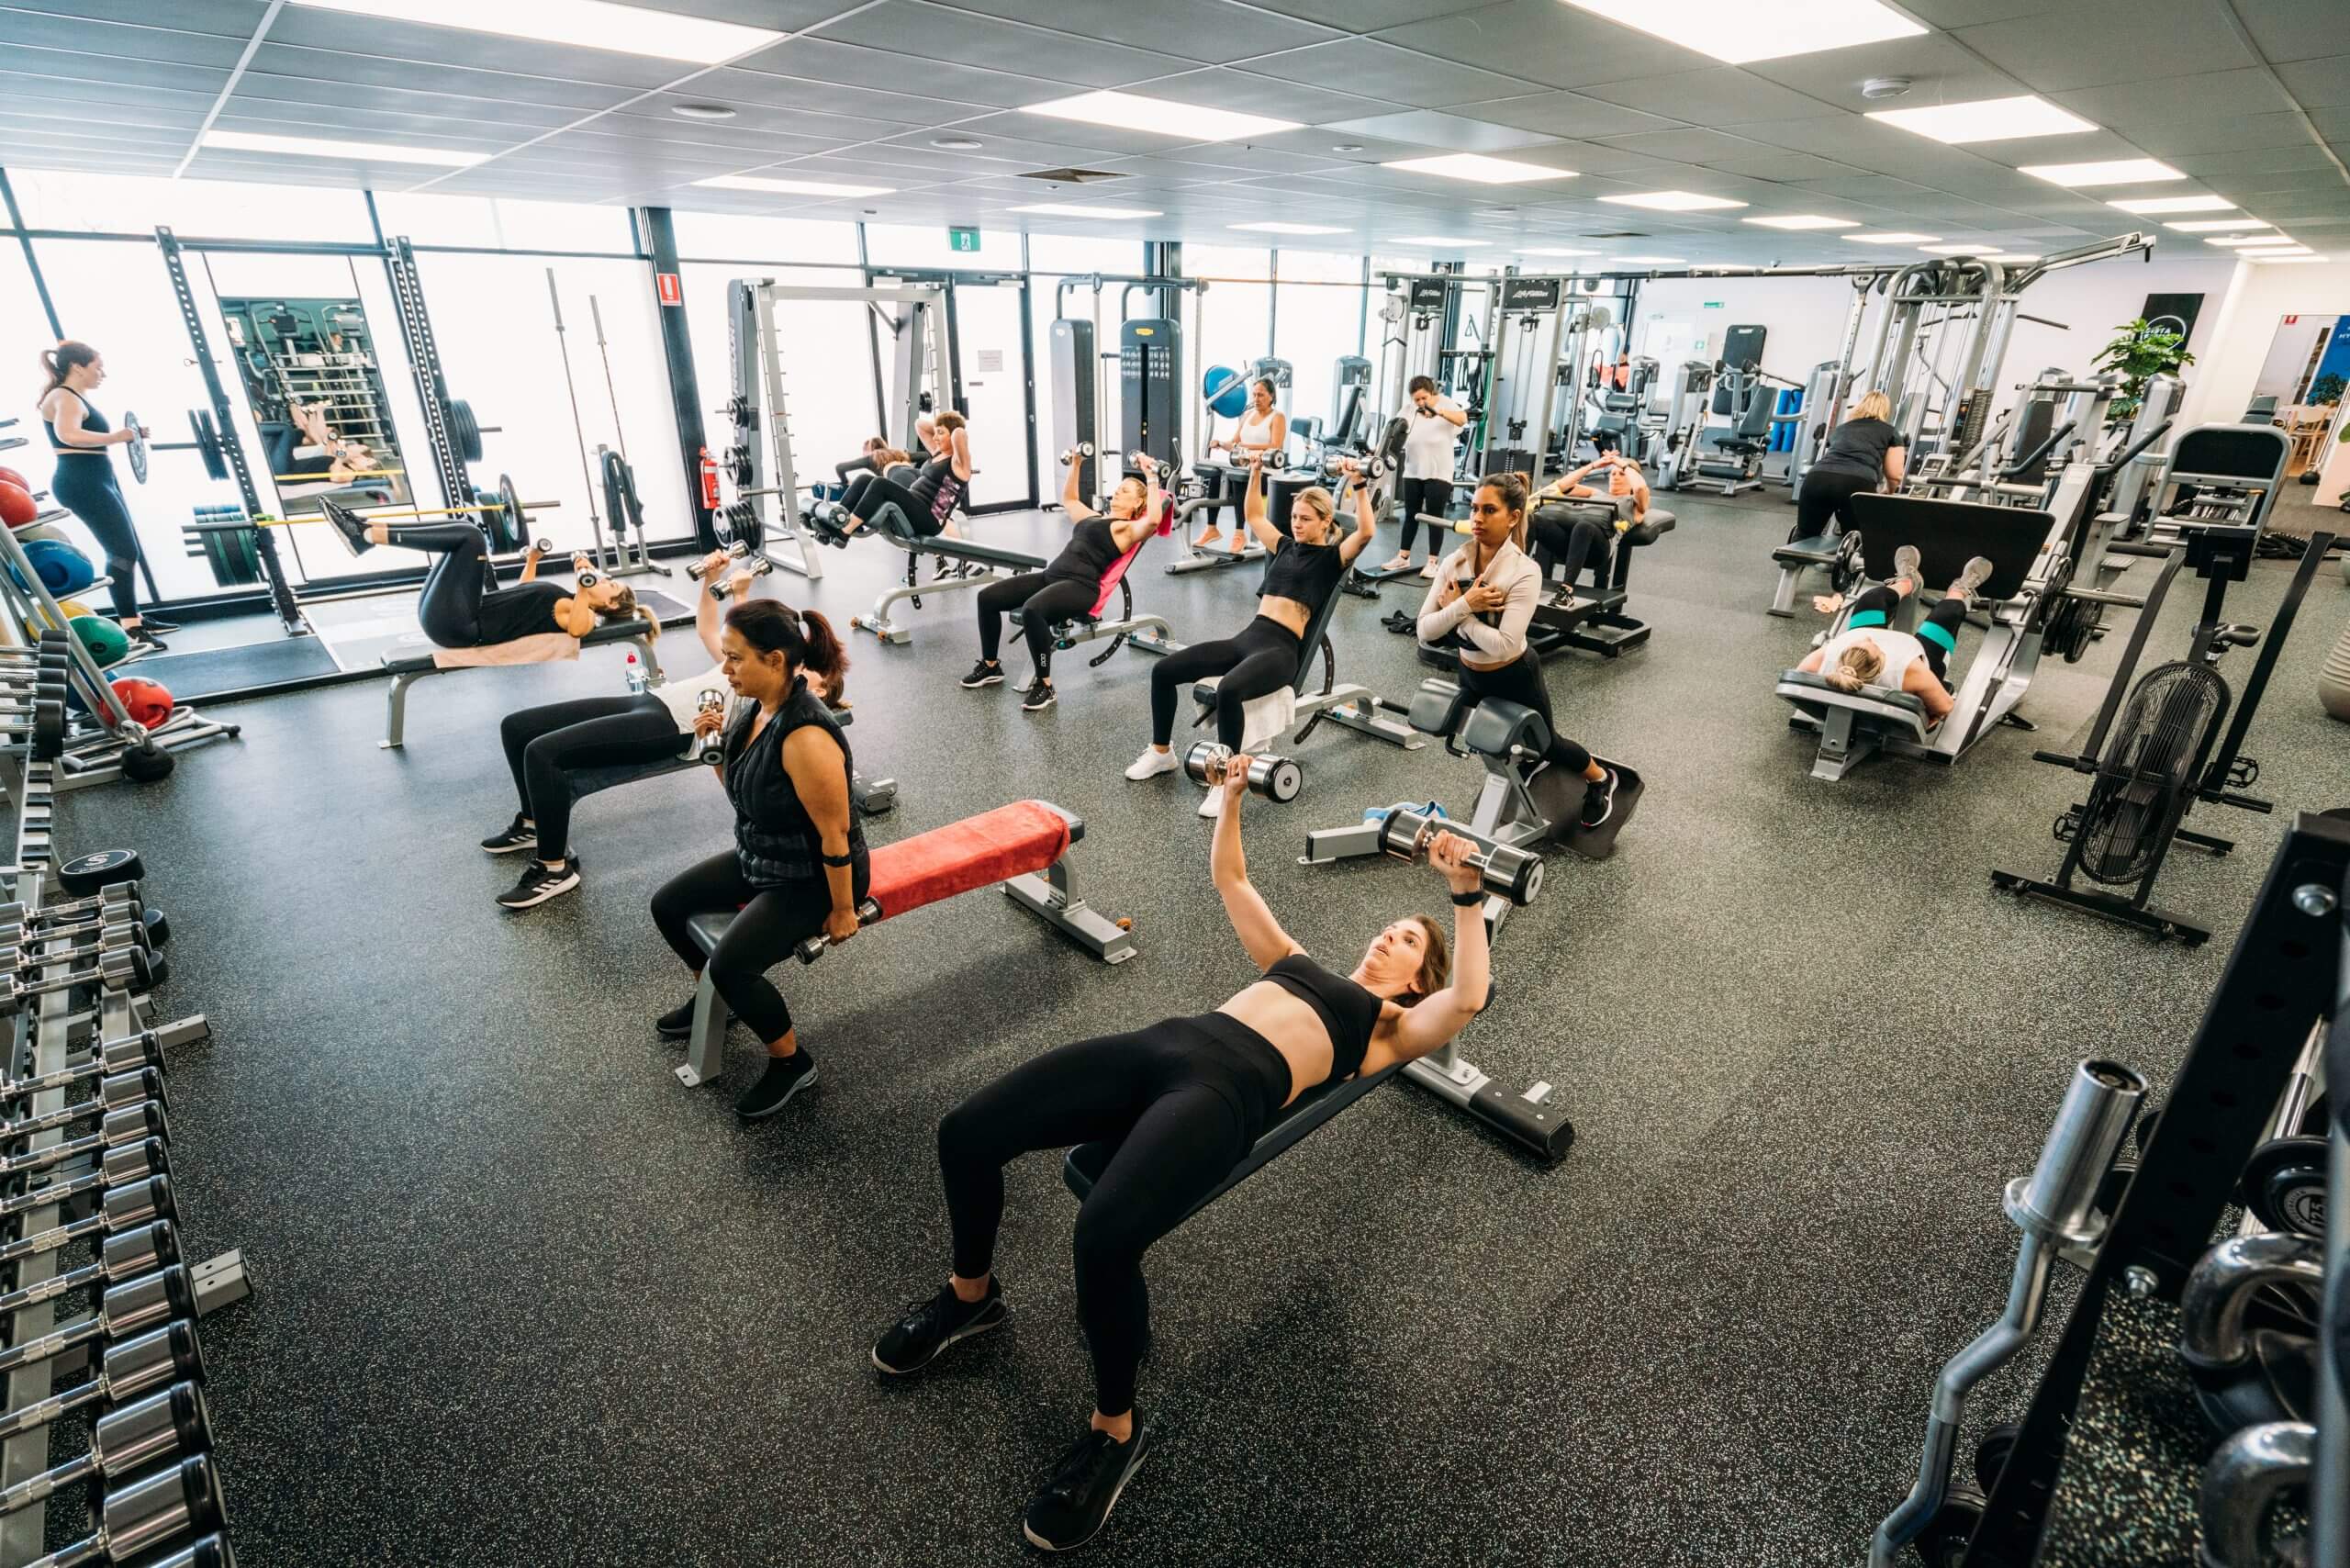 Women exercising on various equipment at the gym